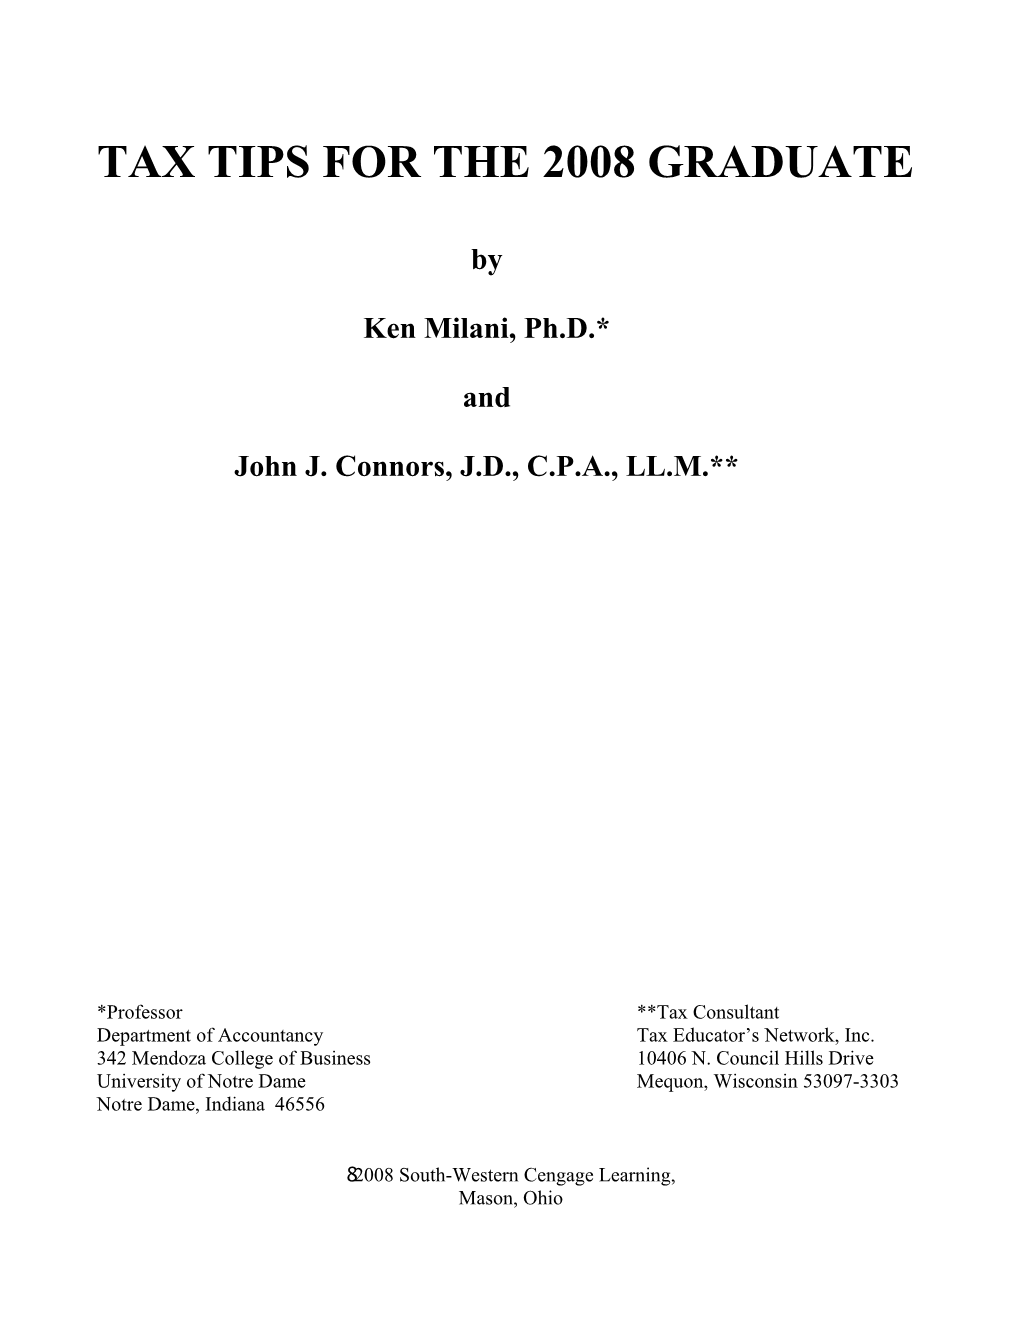 Tax Tips for the 2008 Graduate